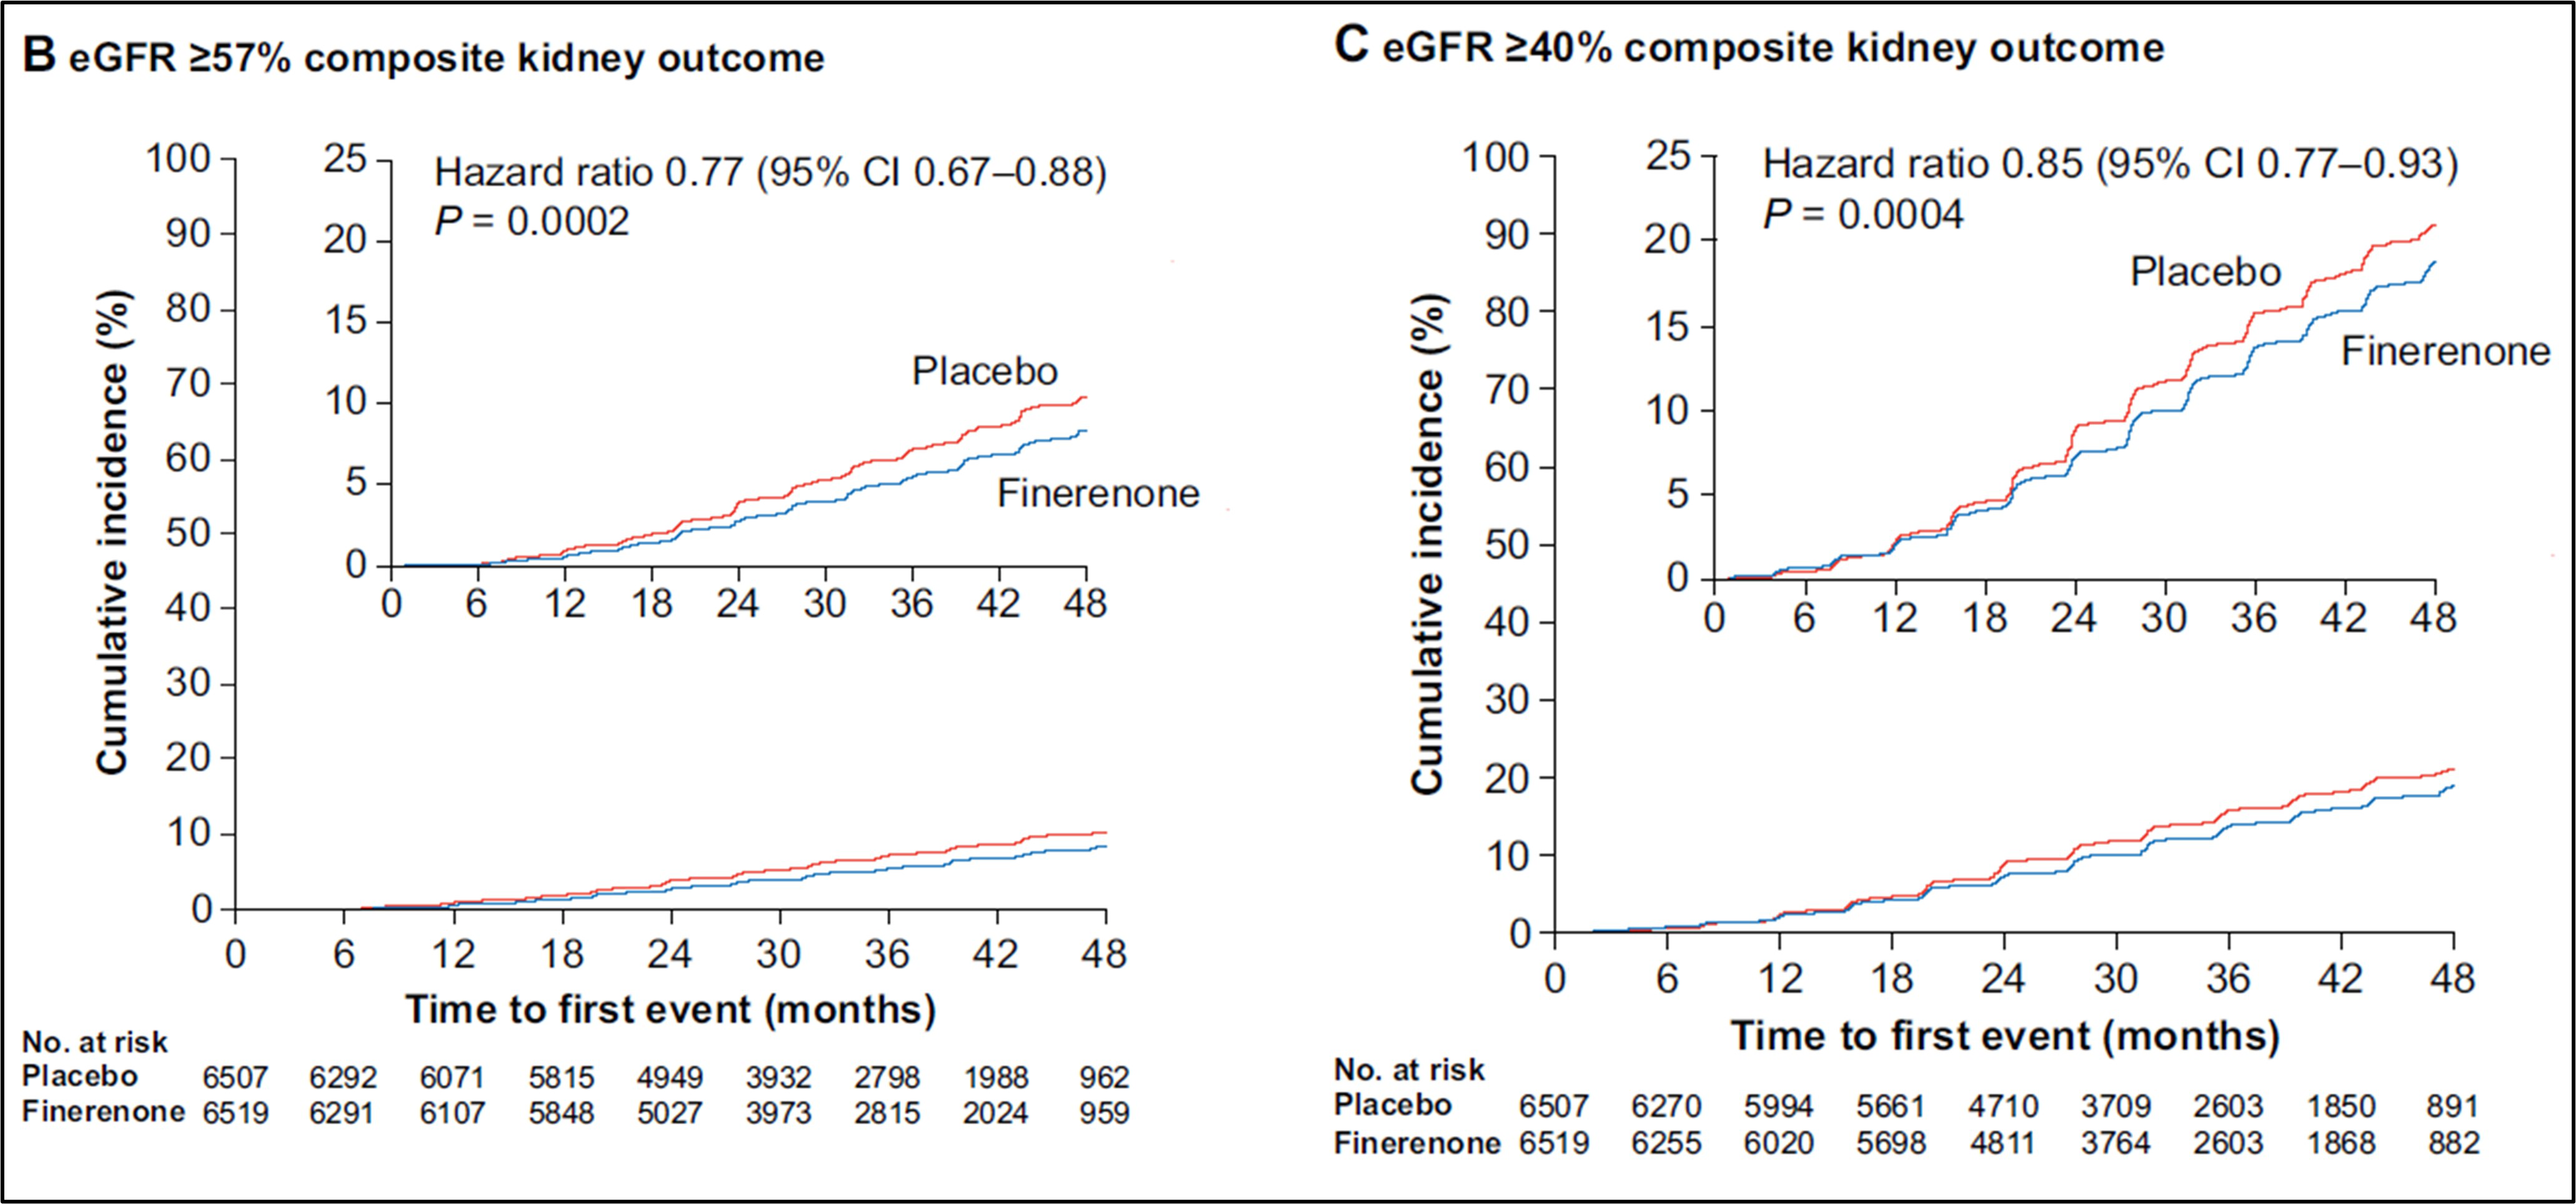 In these Aalen-Johansen curves of time to the 57% and 40% composite renal outcomes, the curves representing patients who received finerenone and placebo follow a similar upward slope, with the curves separating after month 12 and with the finerenone curve falling below the placebo curve until month 48.